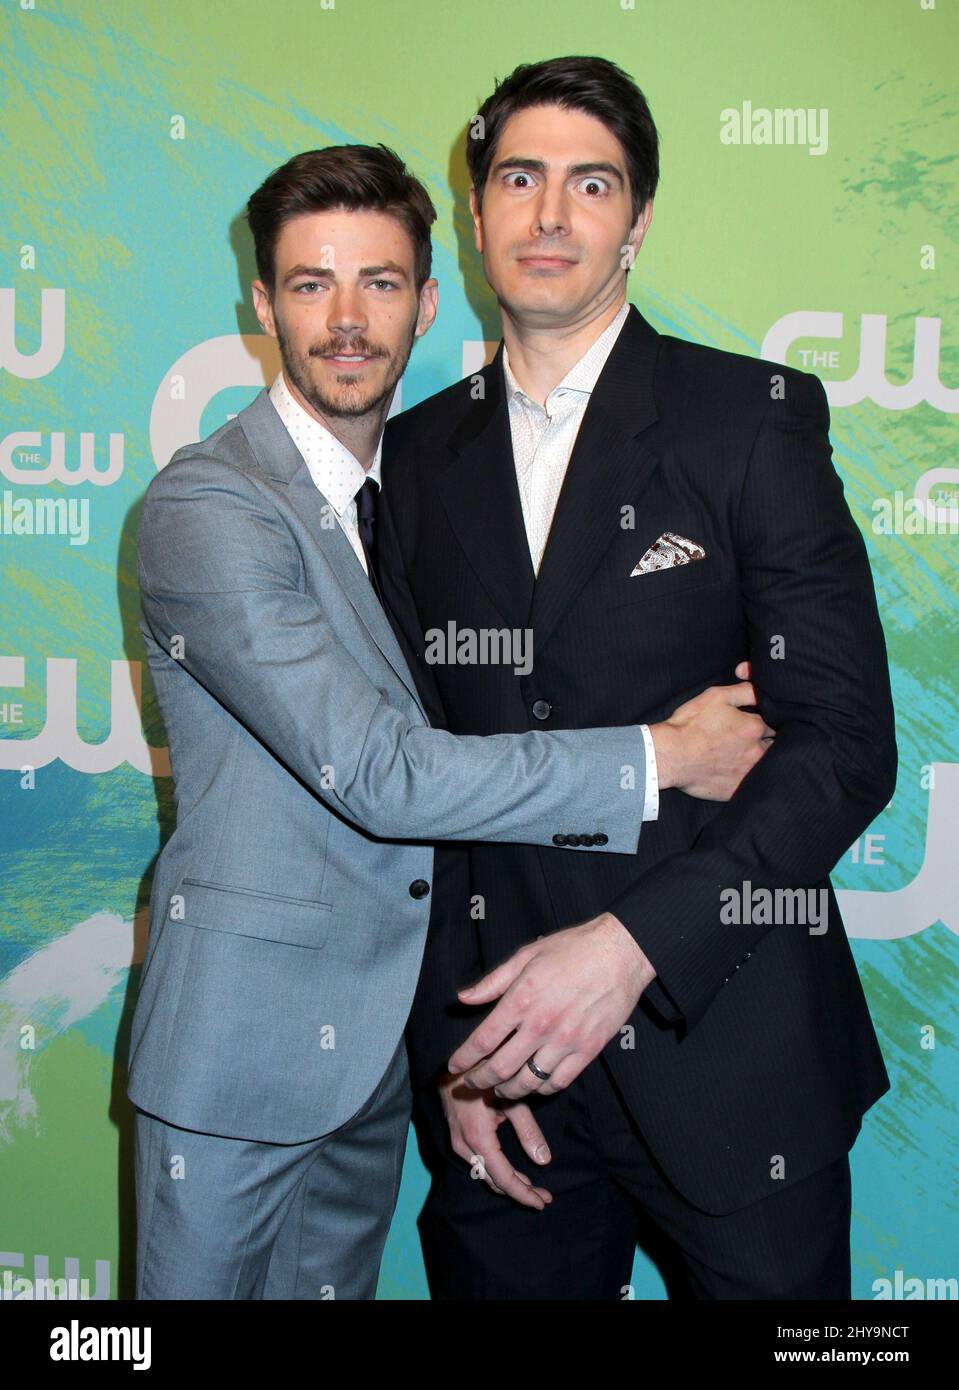 Grant Gustin And Brandon Routh Attending The Cw Networks 2016 Upfront